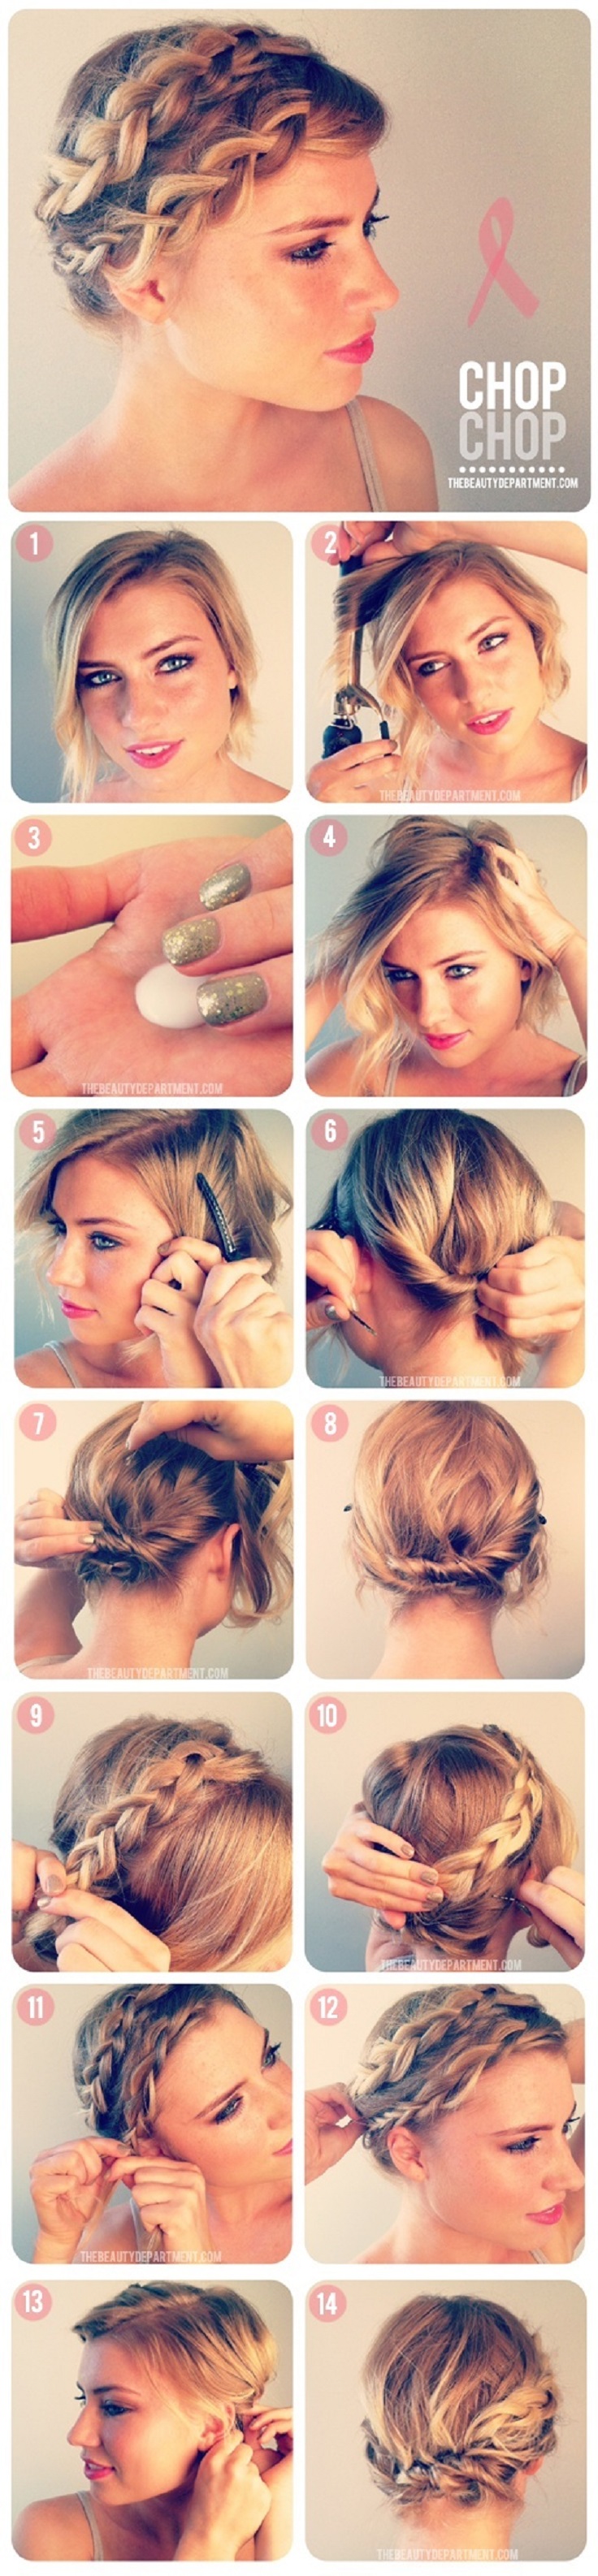 Top 10 Greatest Tutorials for Short Hair - Top Inspired